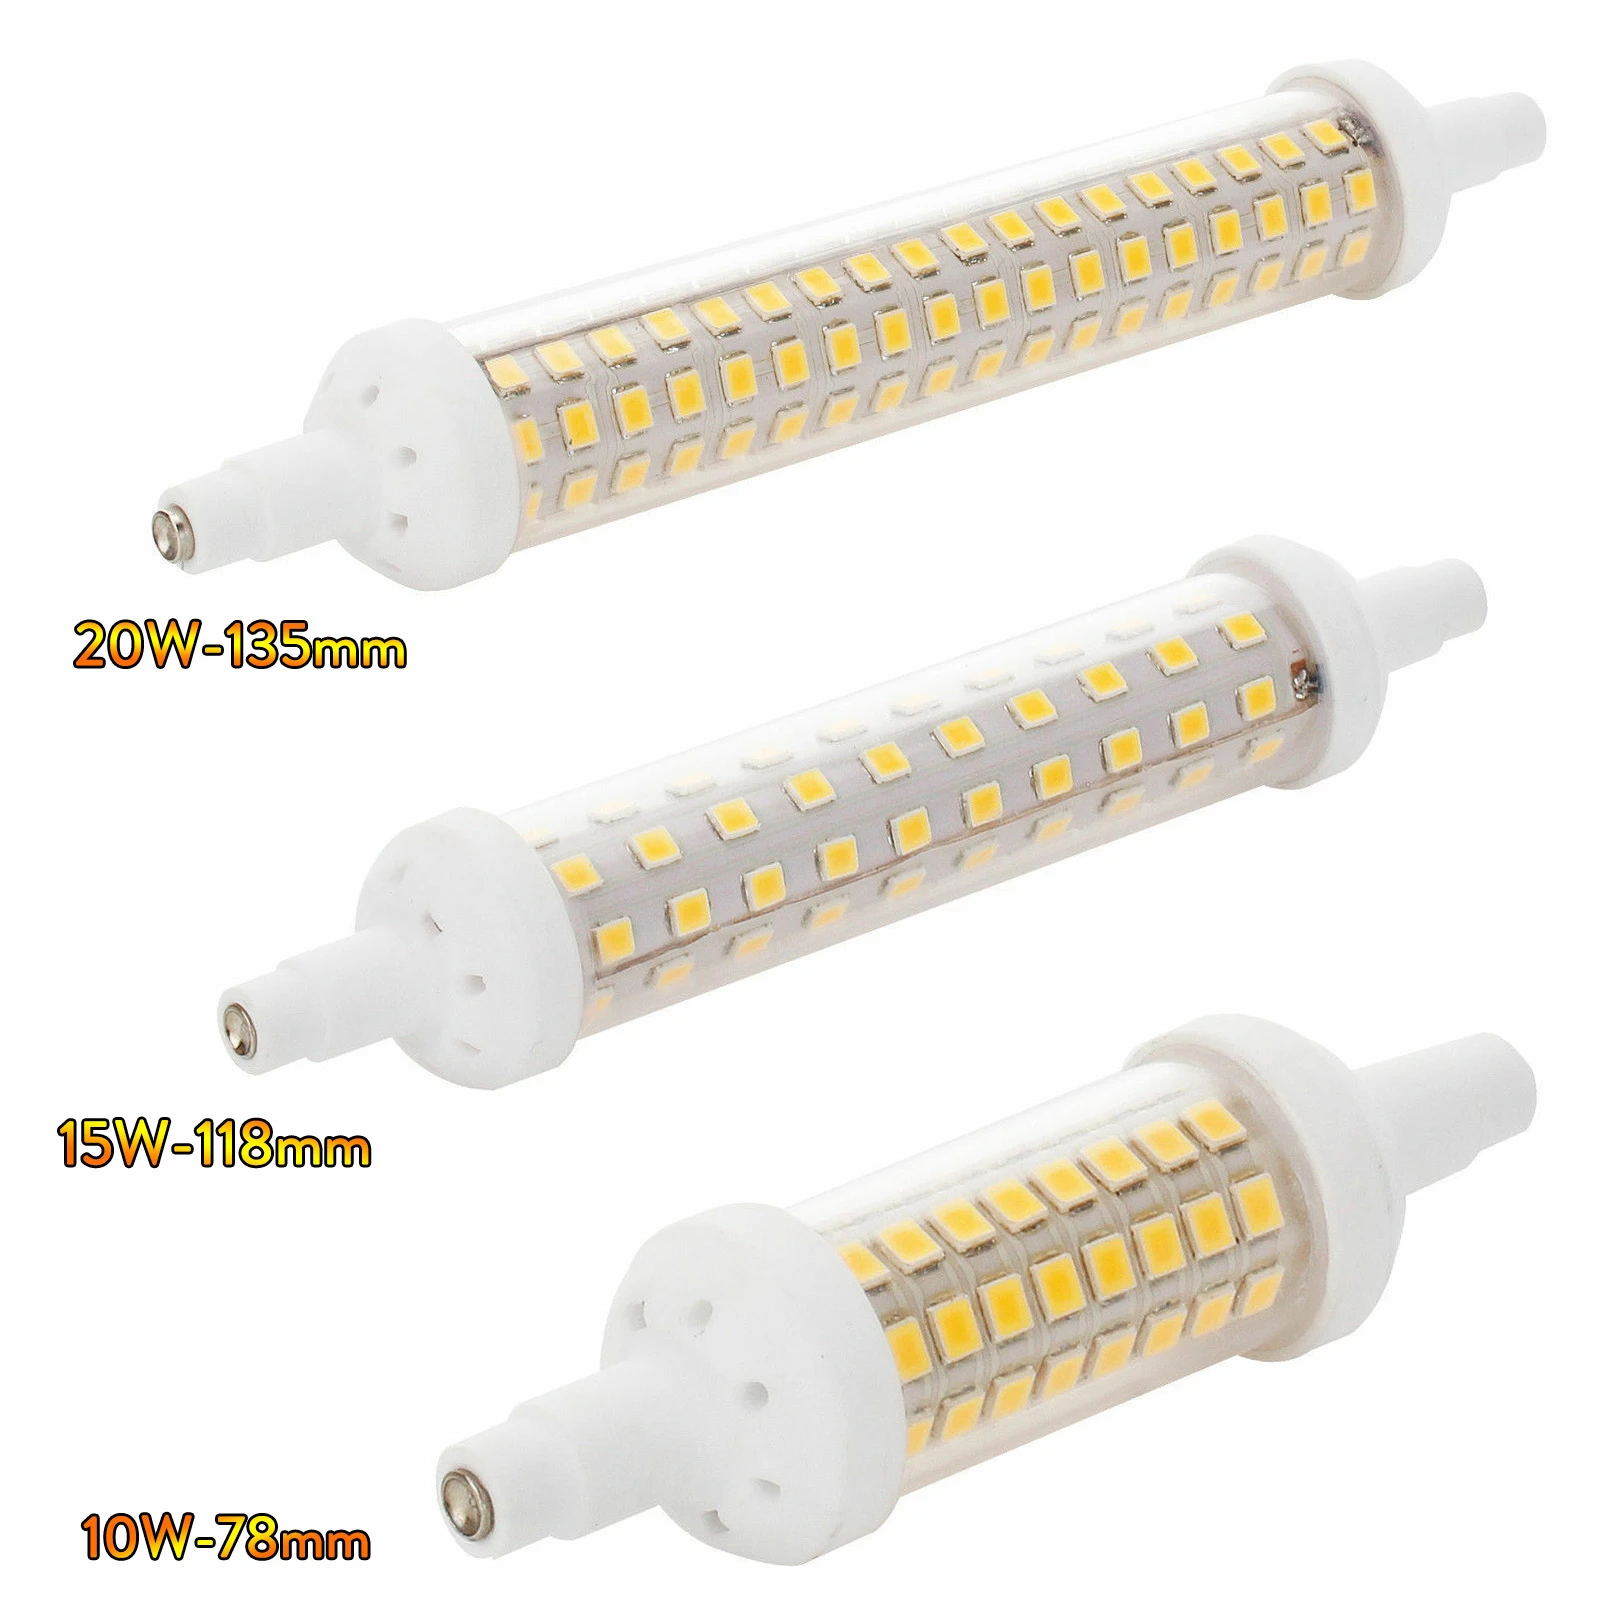 10w 15w 20w Floodlight Led Lamps Smd 2835 78mm 118mm 135mm Dimmable Light Bulb 220v Energy Saving Replace Halogen Light - Led Bulbs & Tubes - AliExpress